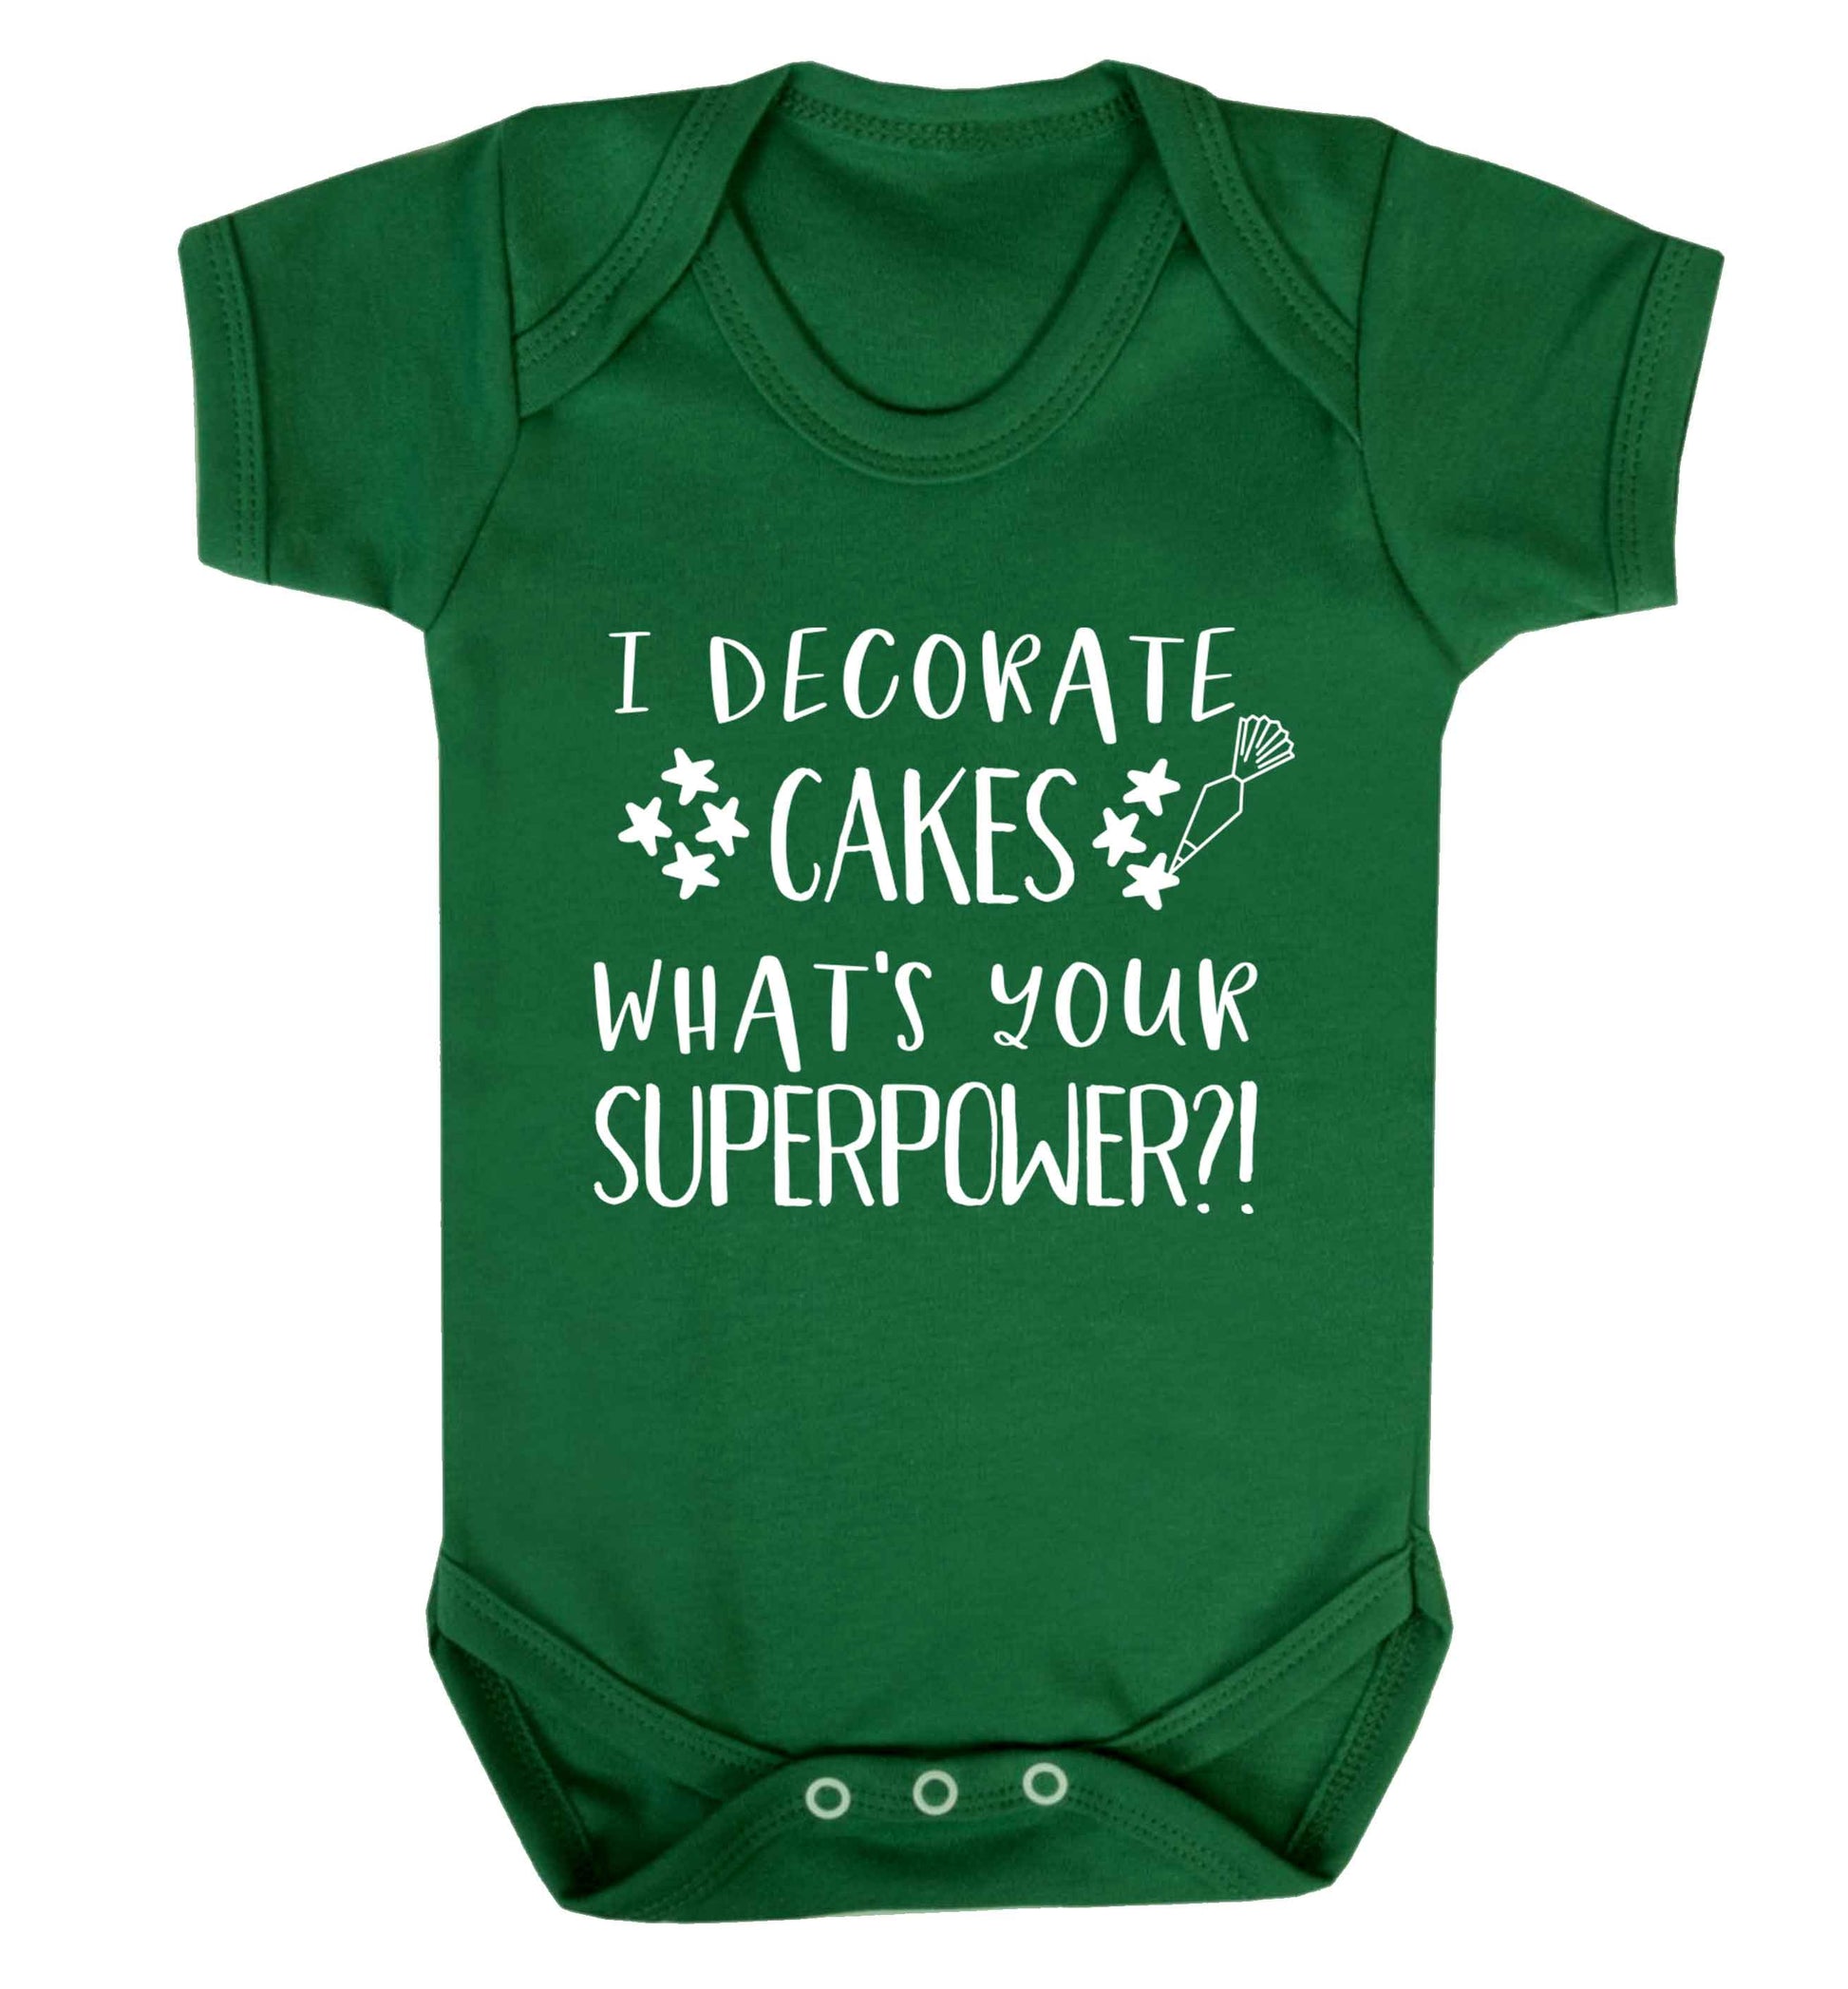 I decorate cakes what's your superpower?! Baby Vest green 18-24 months